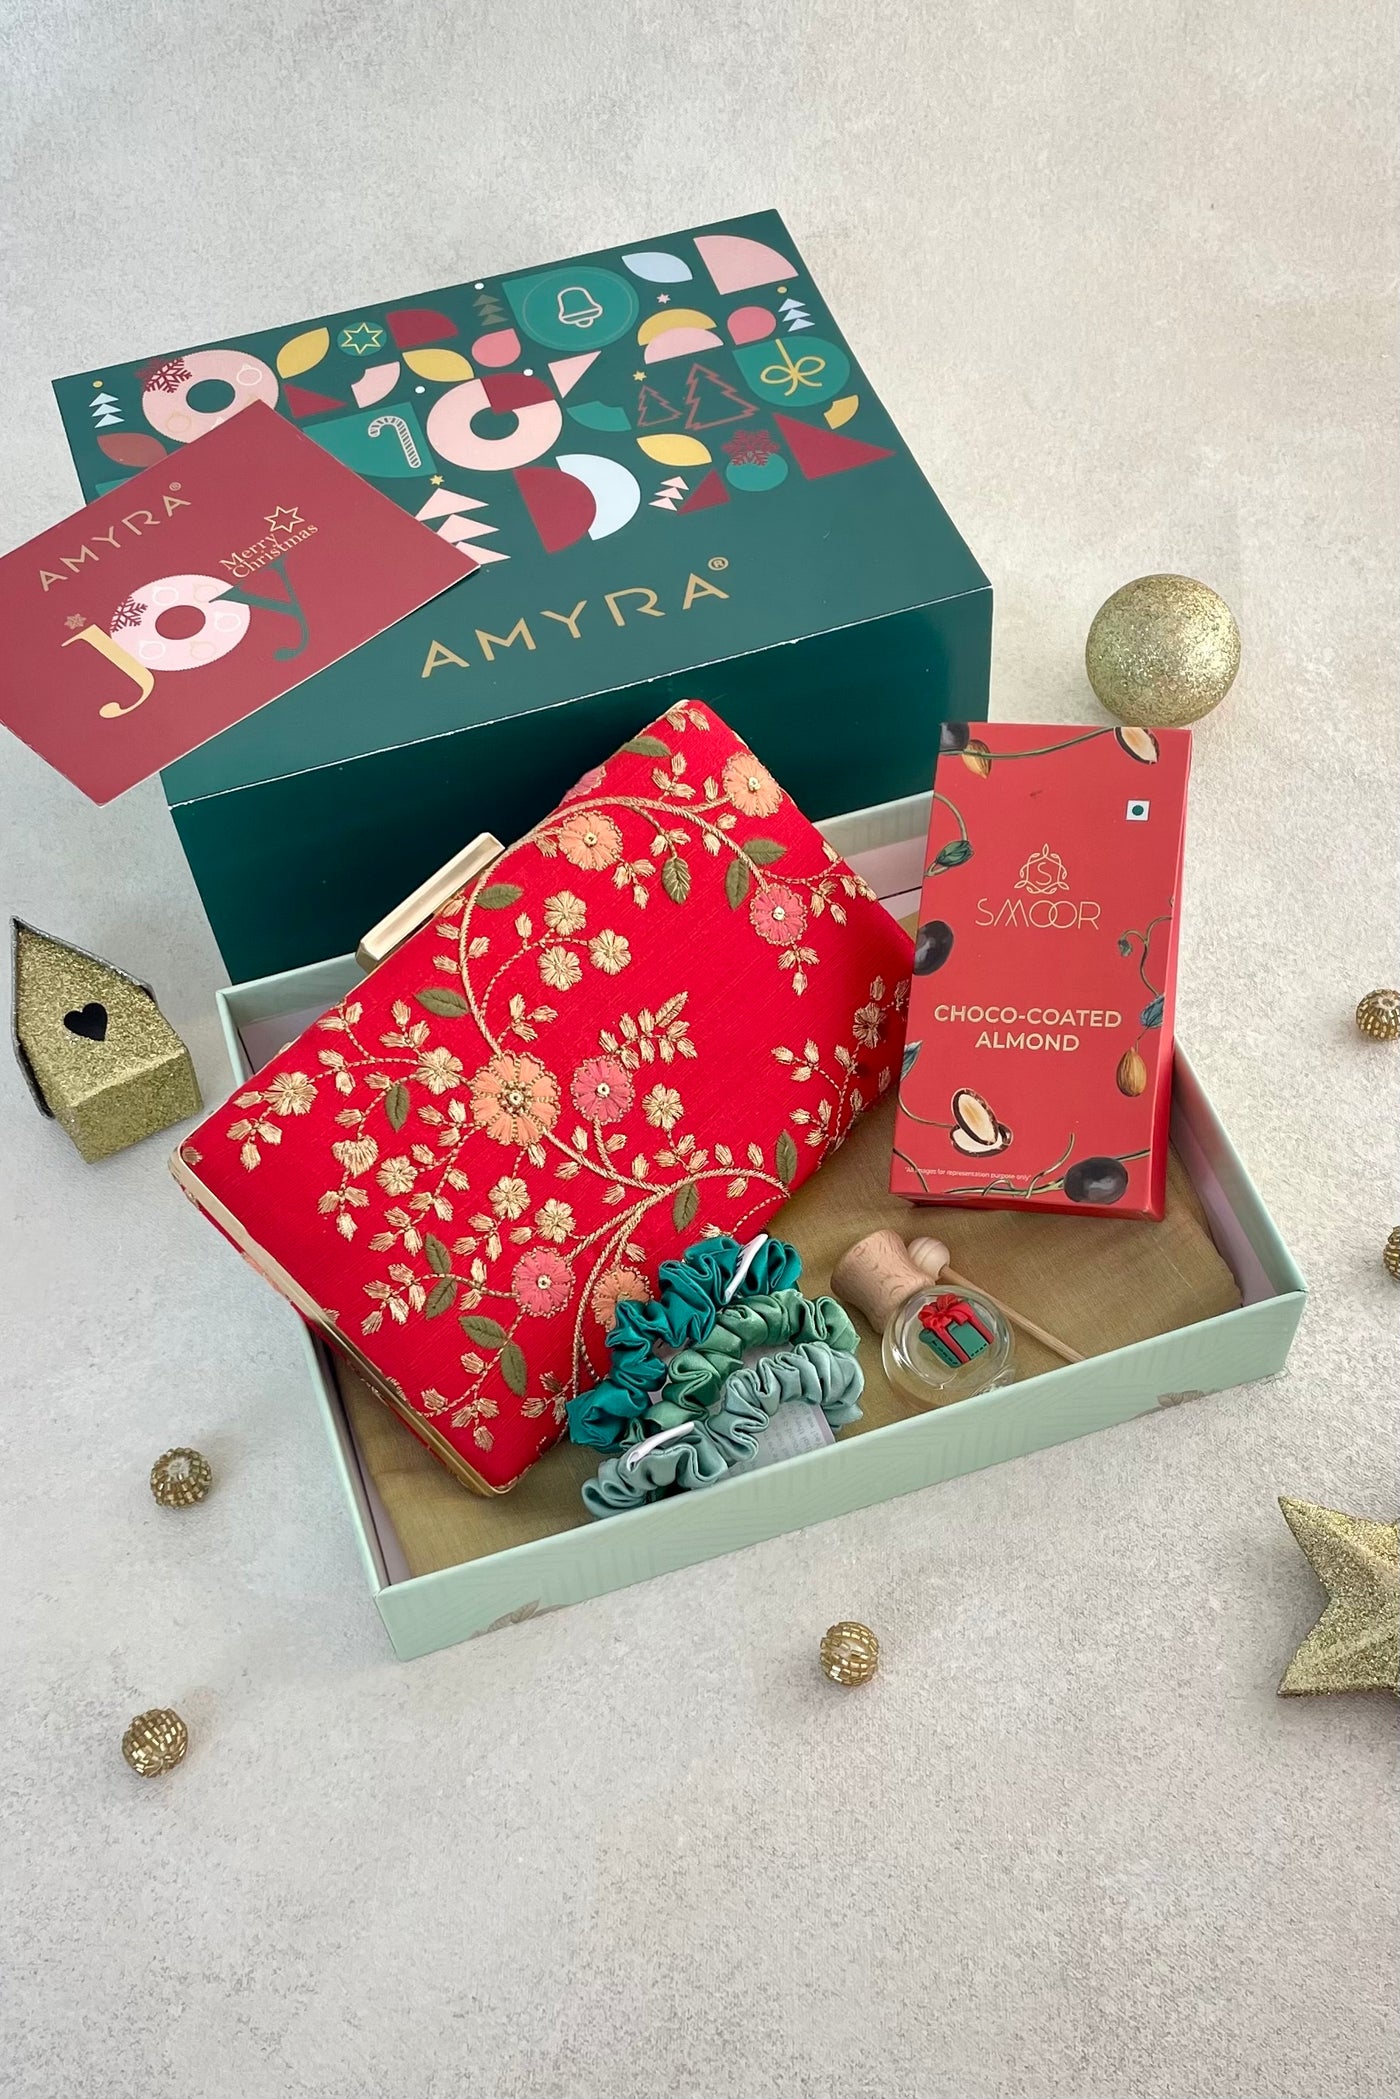 AMYRA Christmas Hamper - Floral Creeper Red Clutch - Scented & Accessory Box